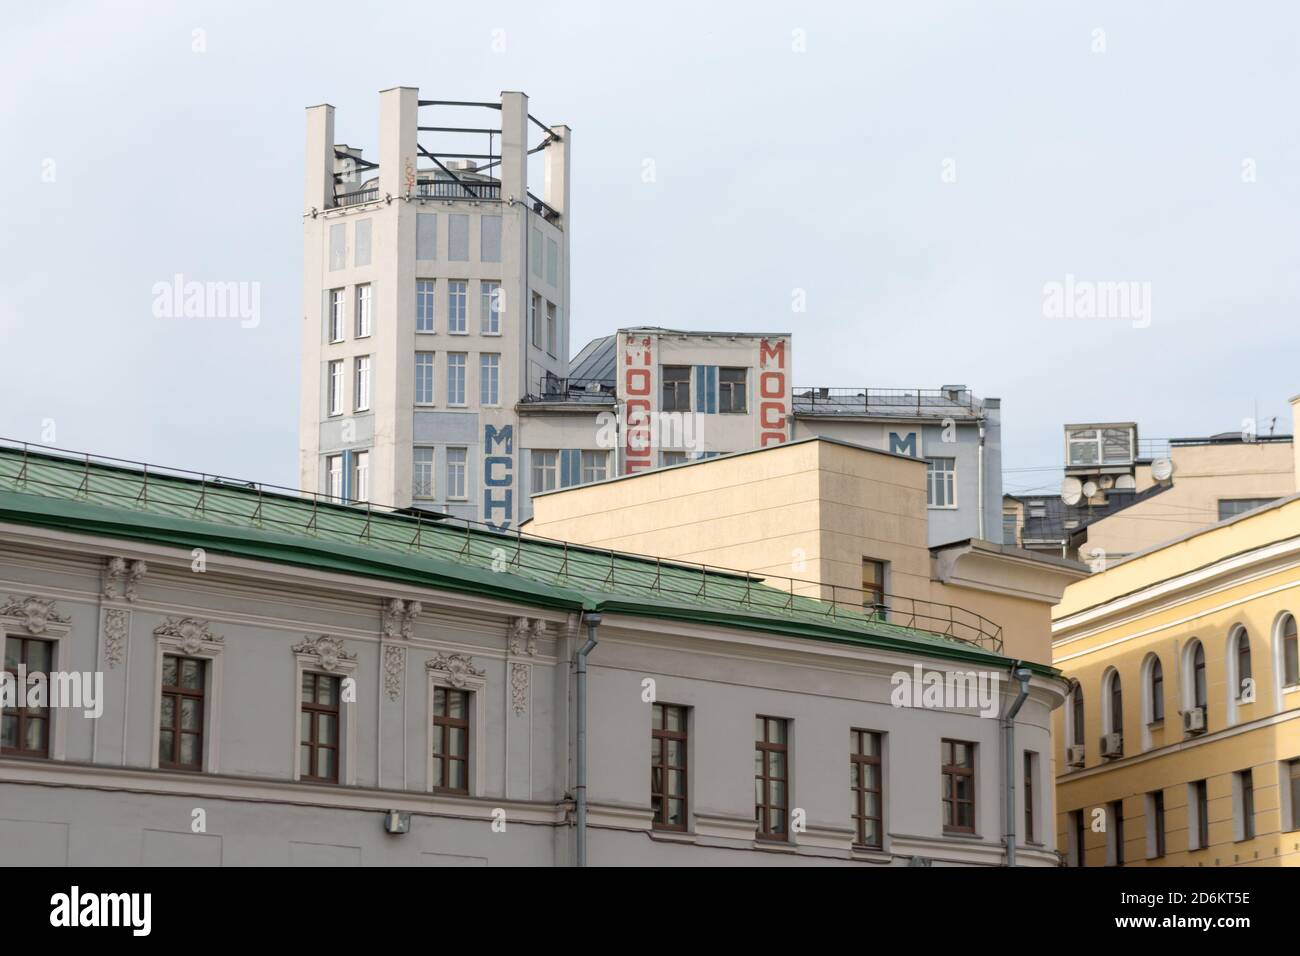 Russia, Moscow, October 02, 2020: Mosselprom building with advertising by  Mayakovsky based on sketches by  Rodchenko Stock Photo